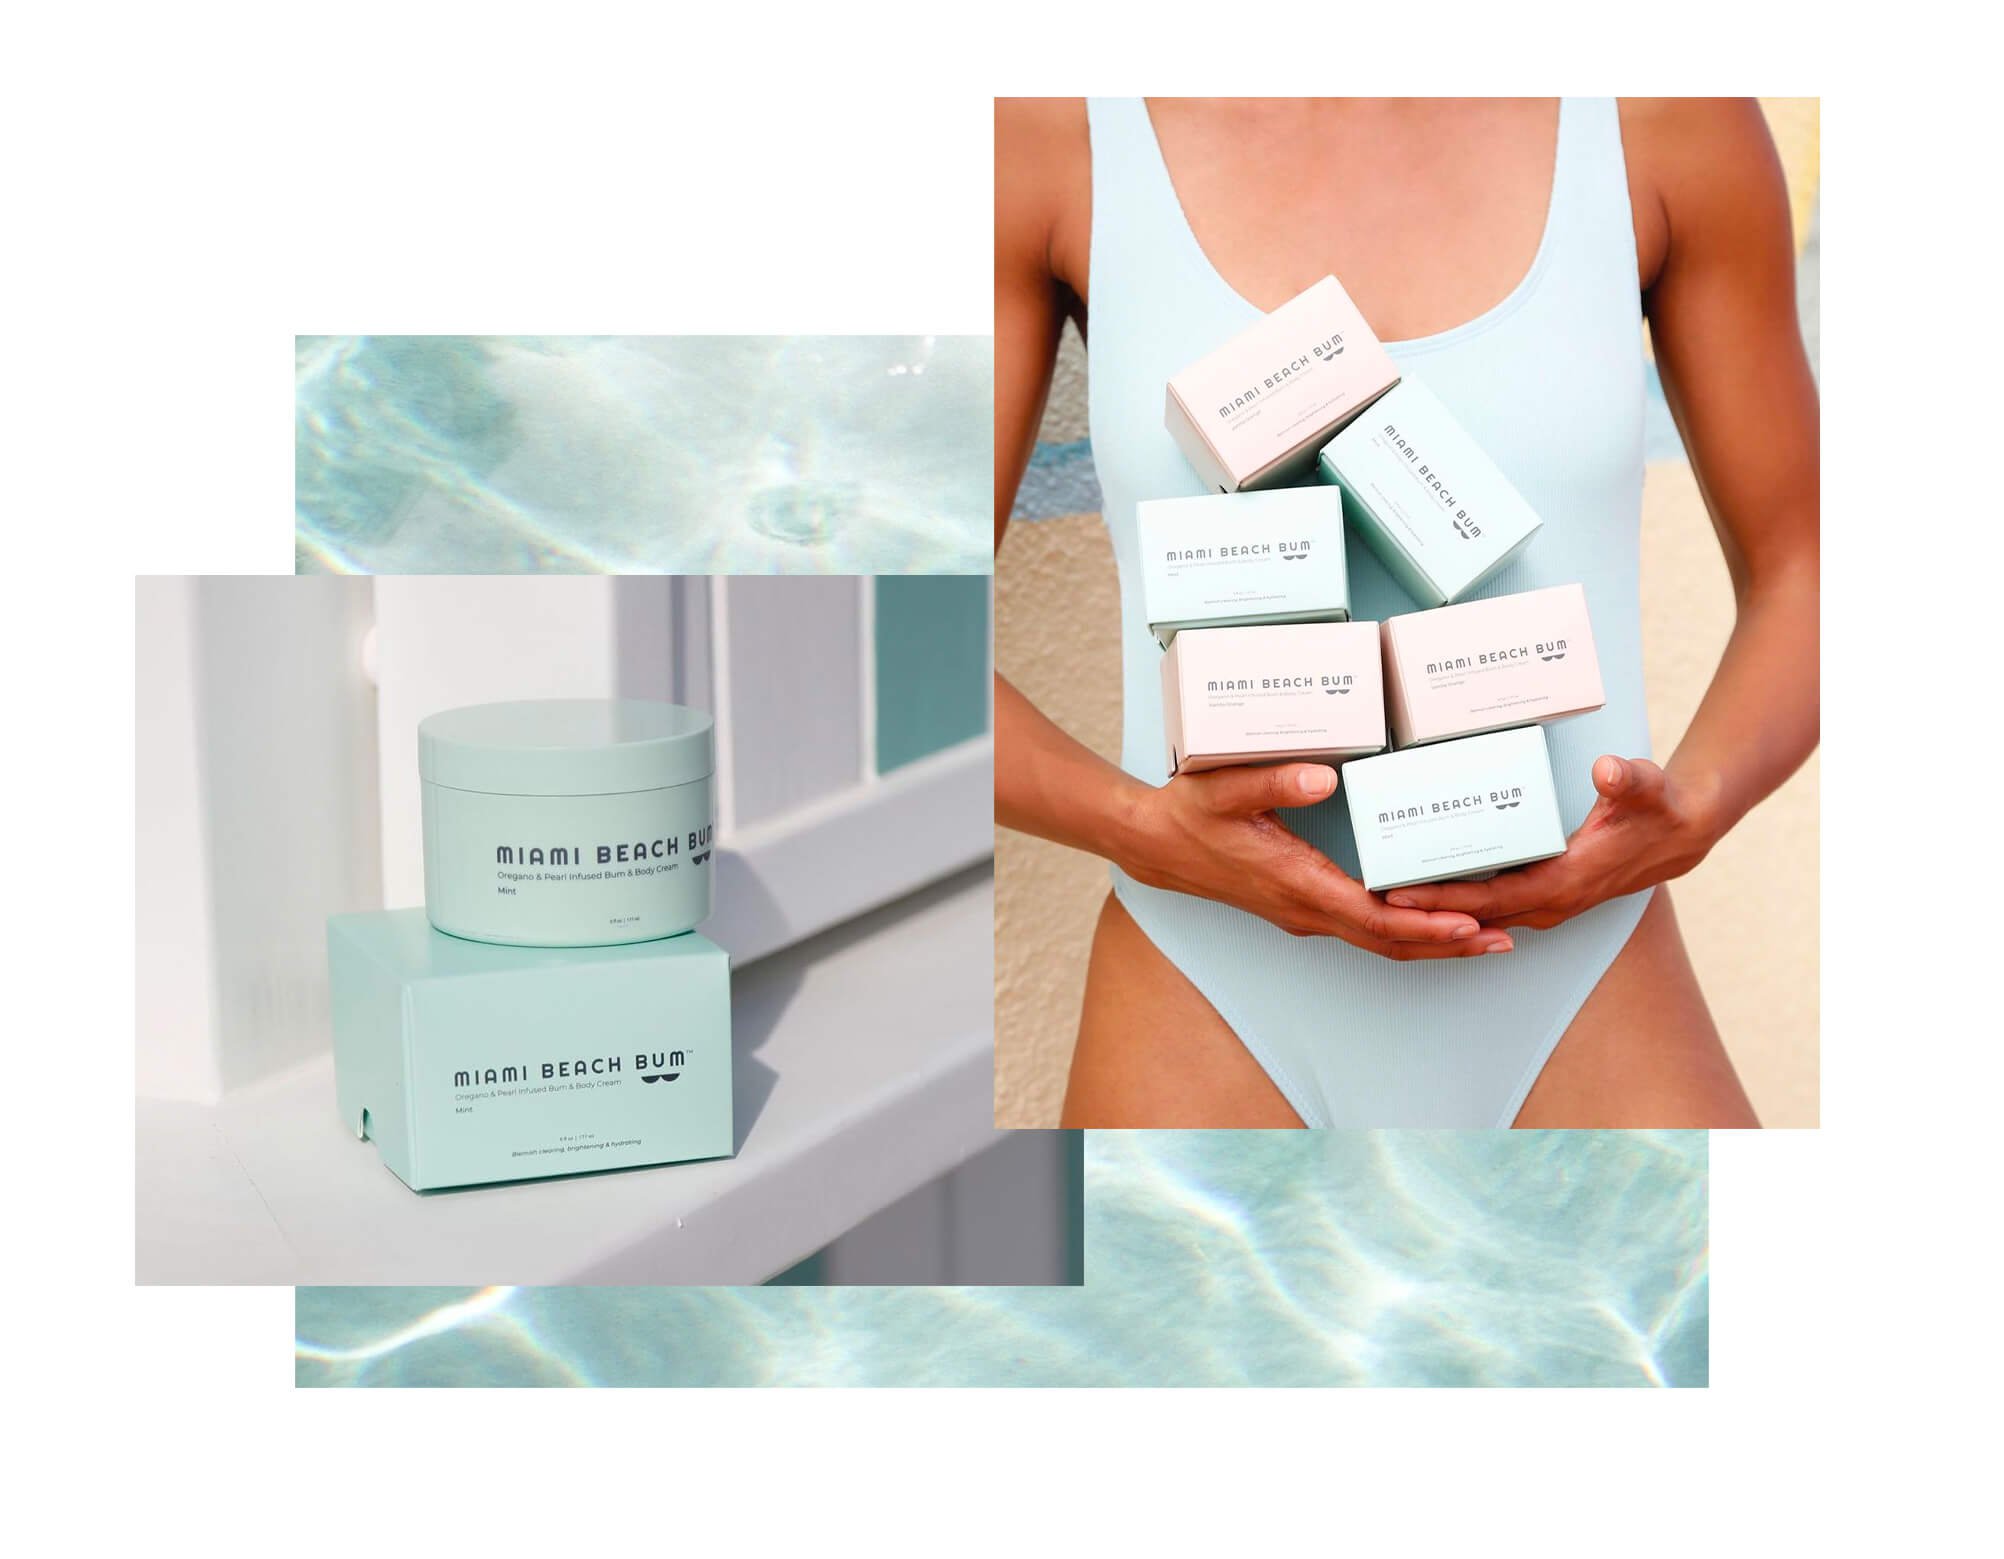 Jacober Creative Brand Identity for Miami beach Bum. Photo of lifestyle photography and packaging design